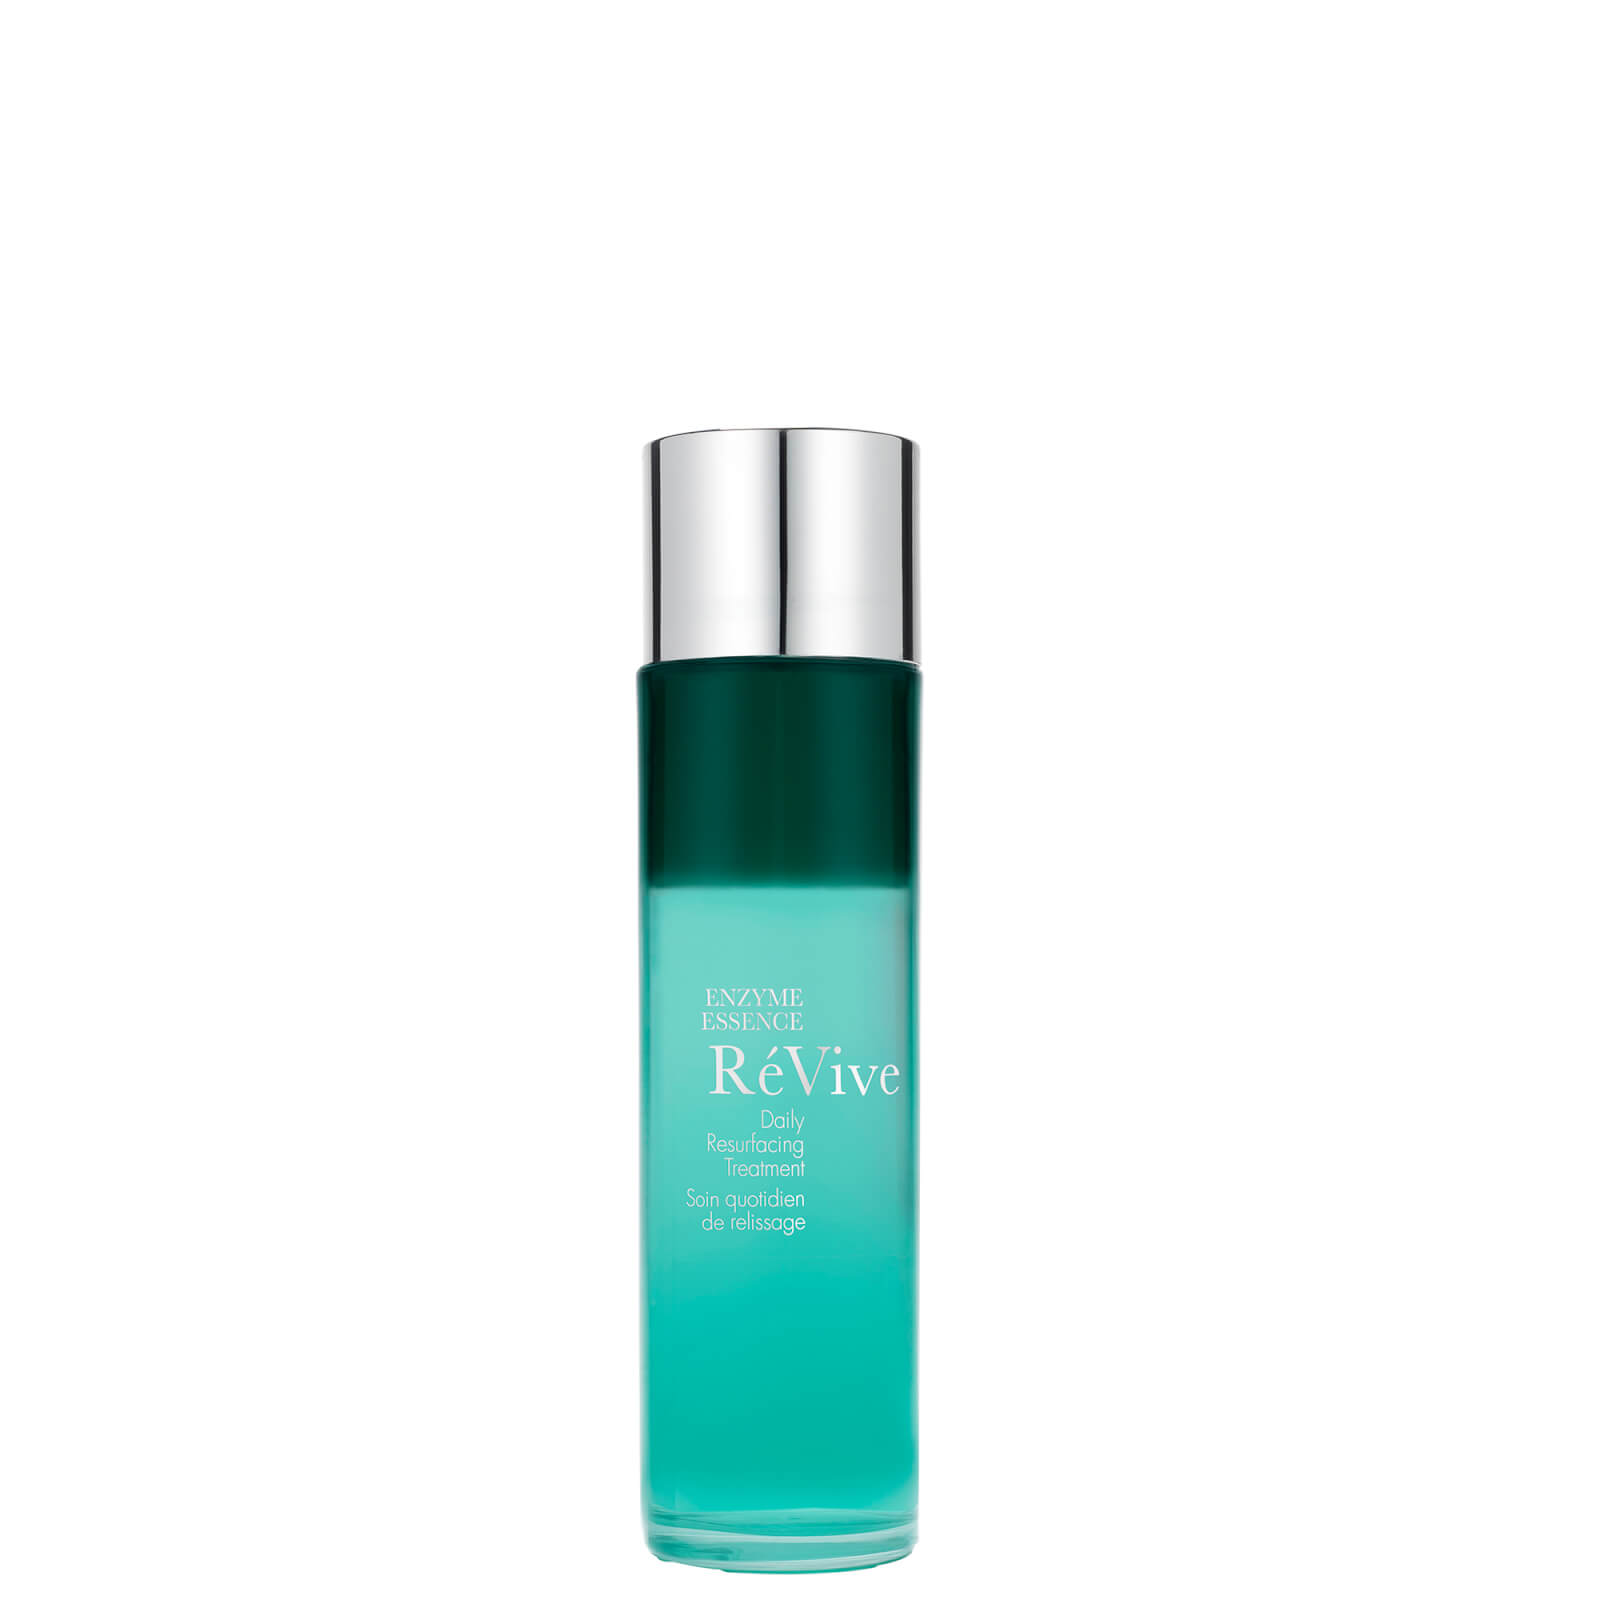 Revive Enzyme Essence Daily Resurfacing Treatment 135ml